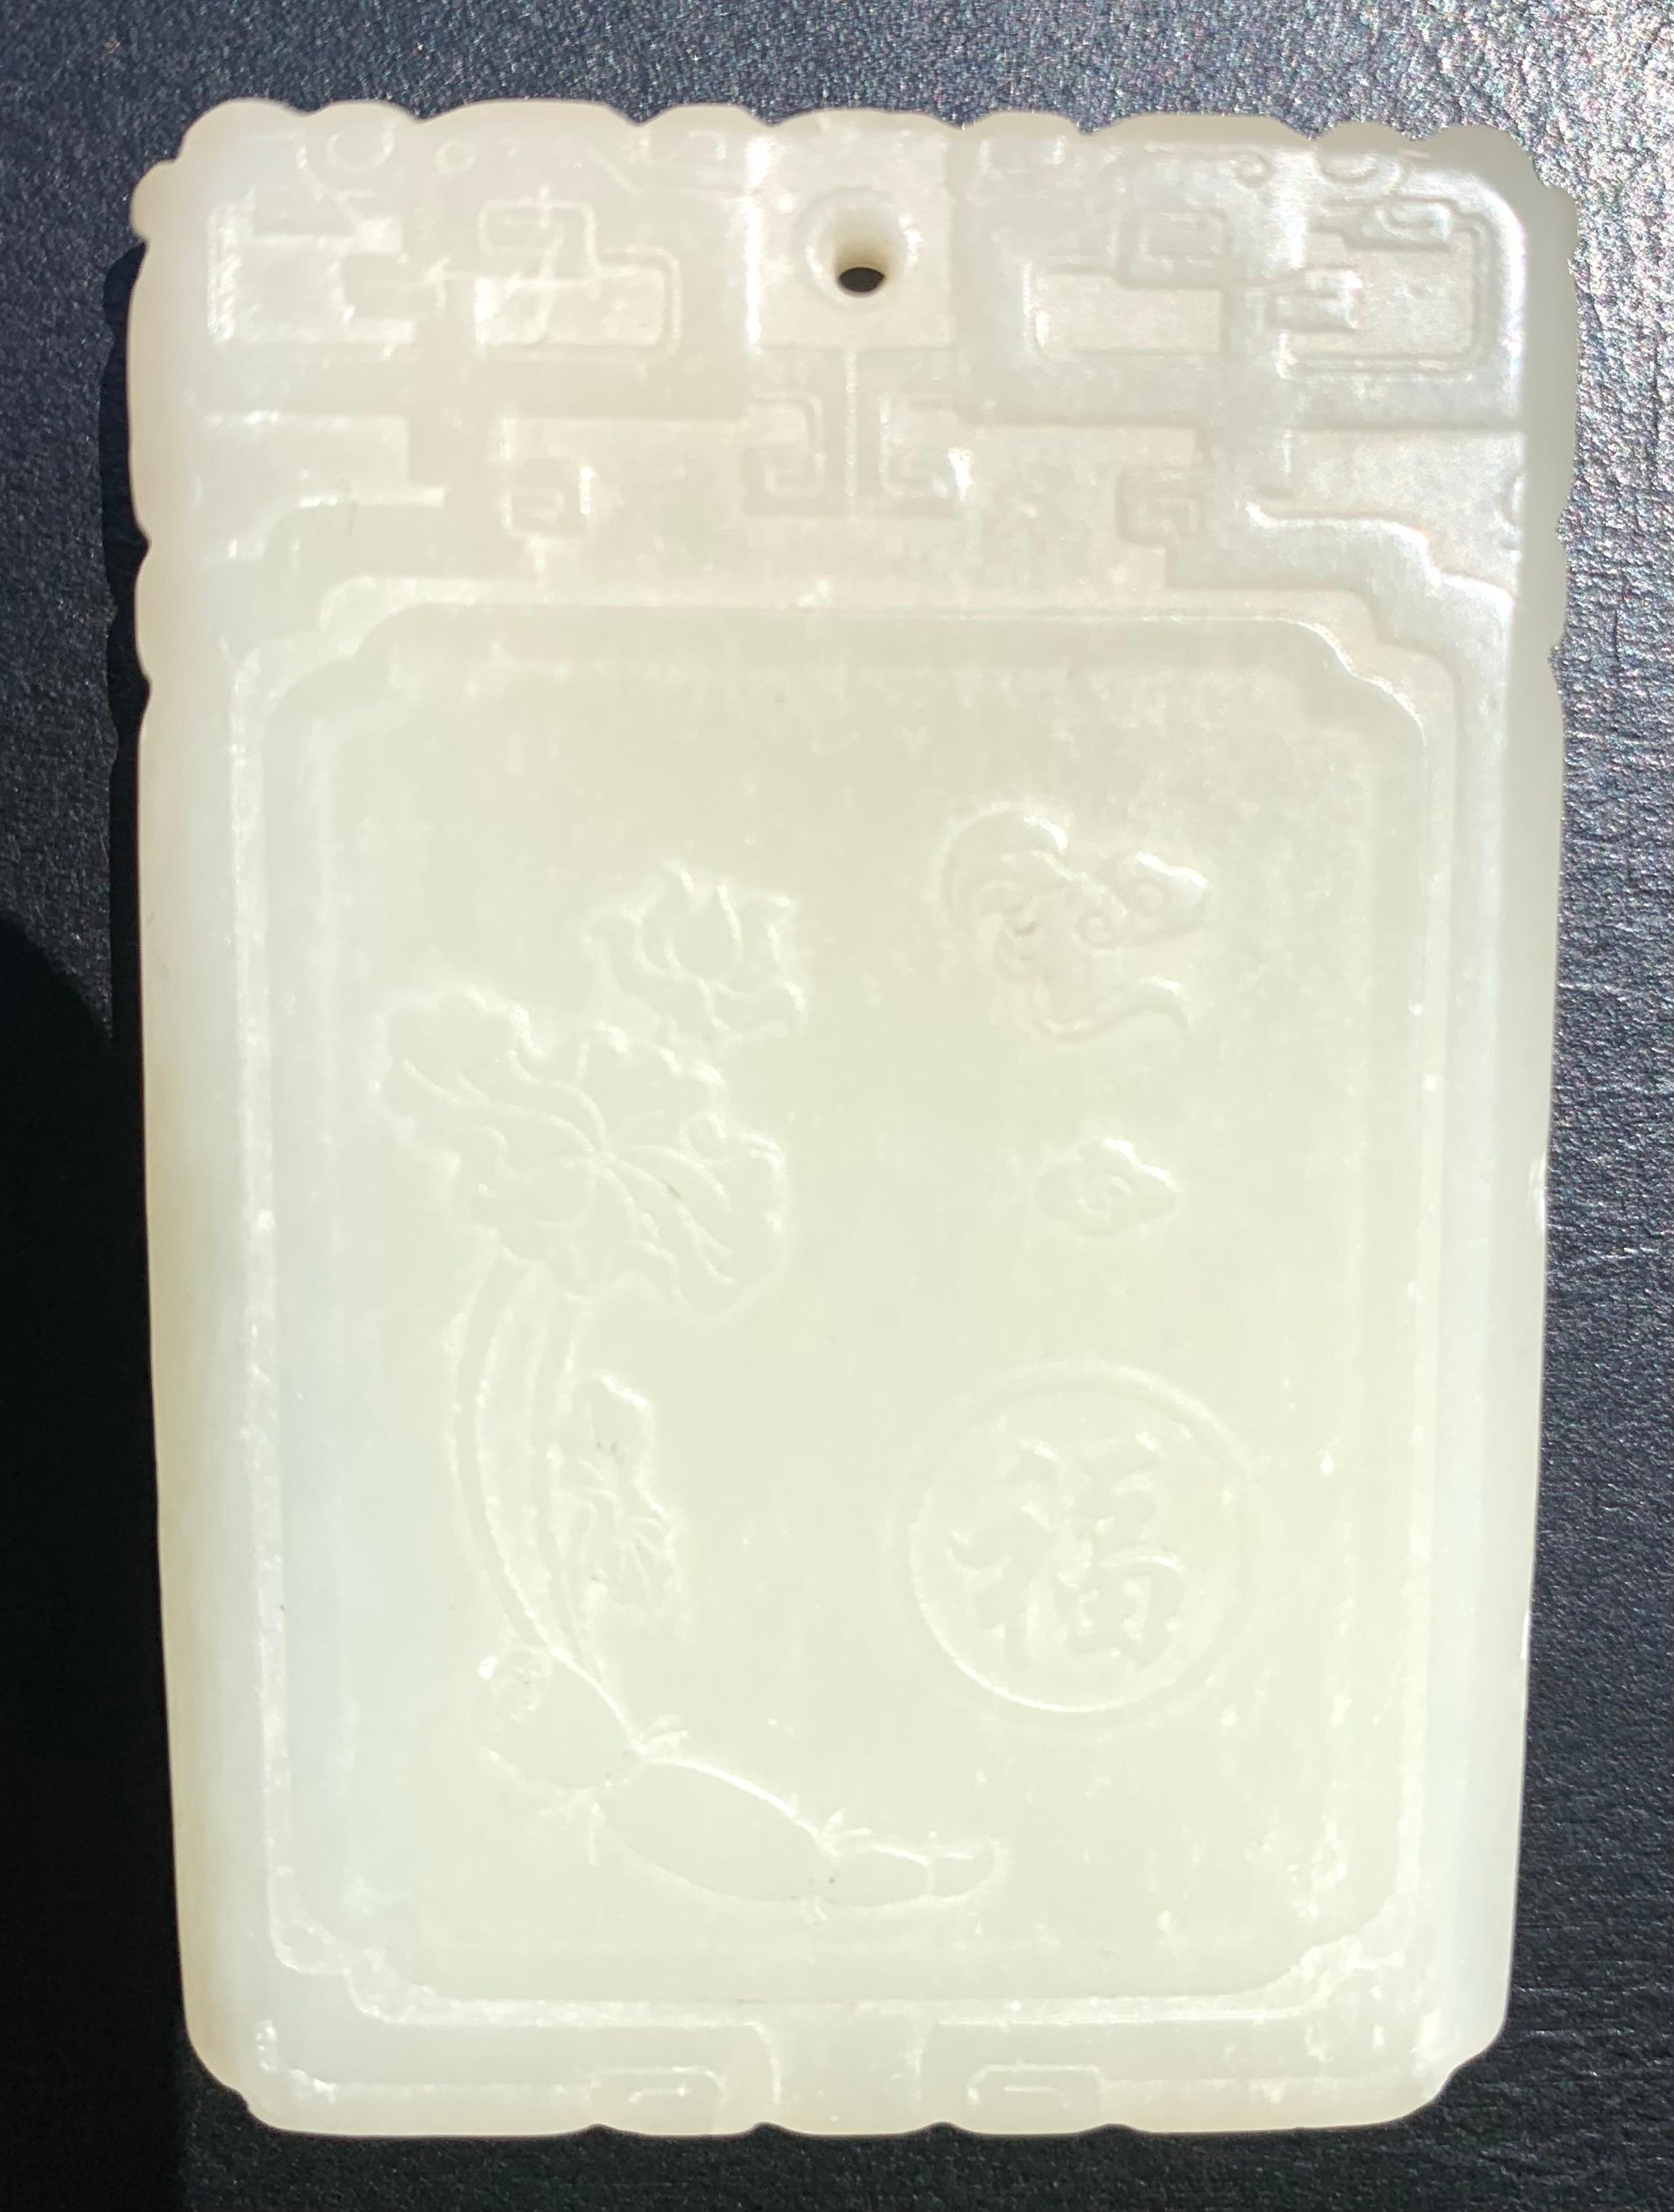 Fine antique 19th century Qing Dynasty celadon jade pendant plaque of rectangular form, exceptionally well carved on both sides. On one side, a beautiful Quan Yin is ridding a mythical beast, Qilin, who is prancing atop stylized clouds. She holds a